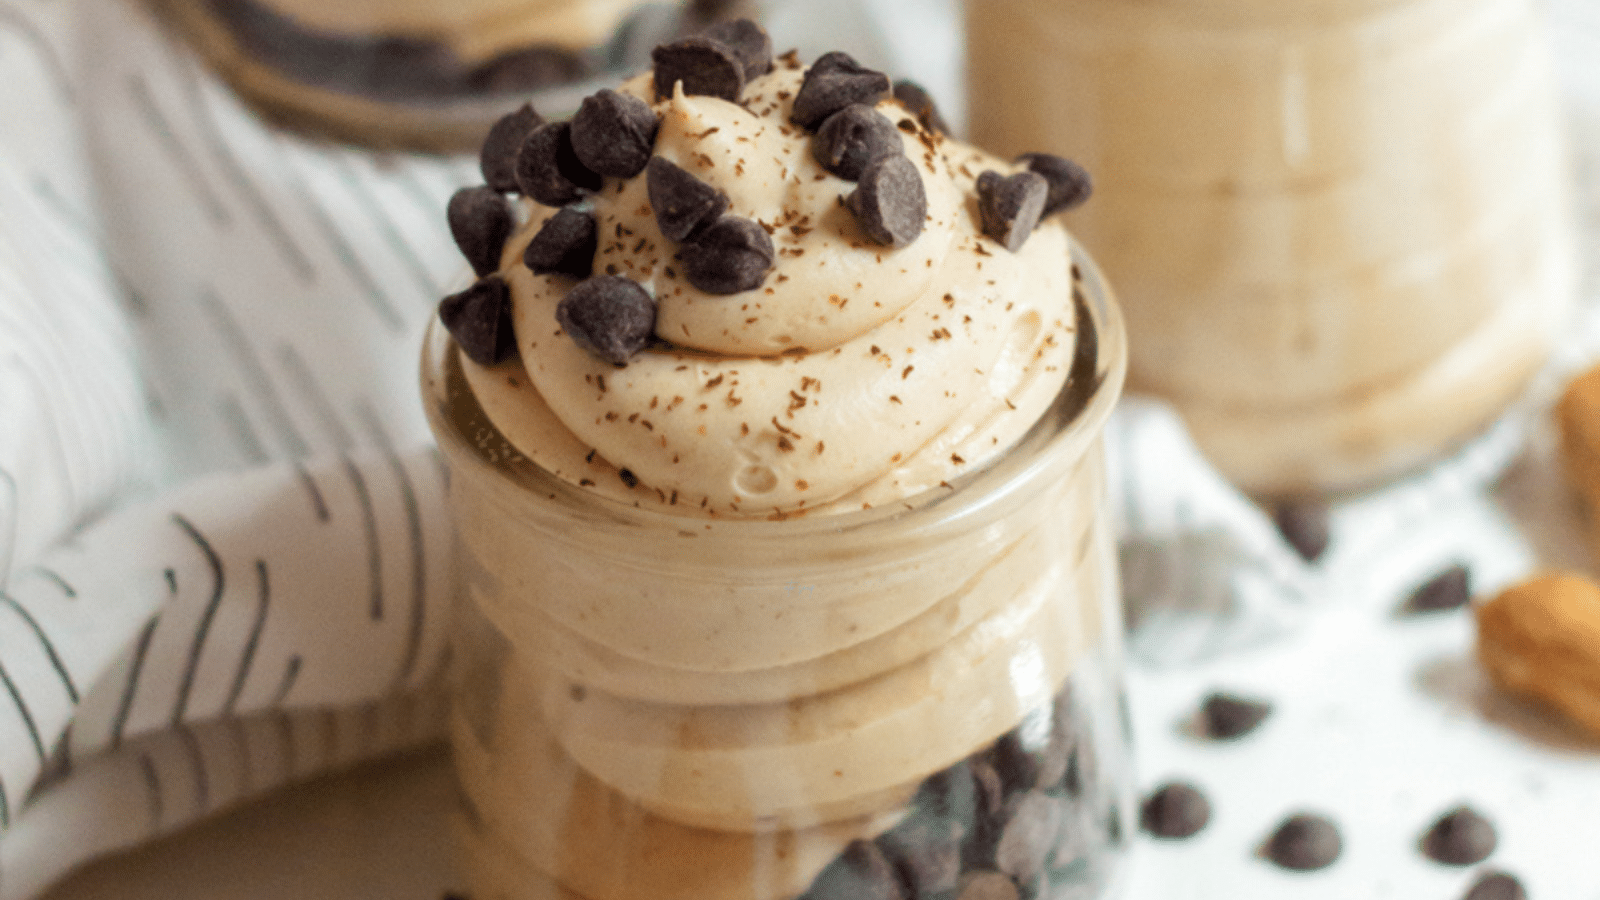 peanut butter mousse with chocolate chips on top